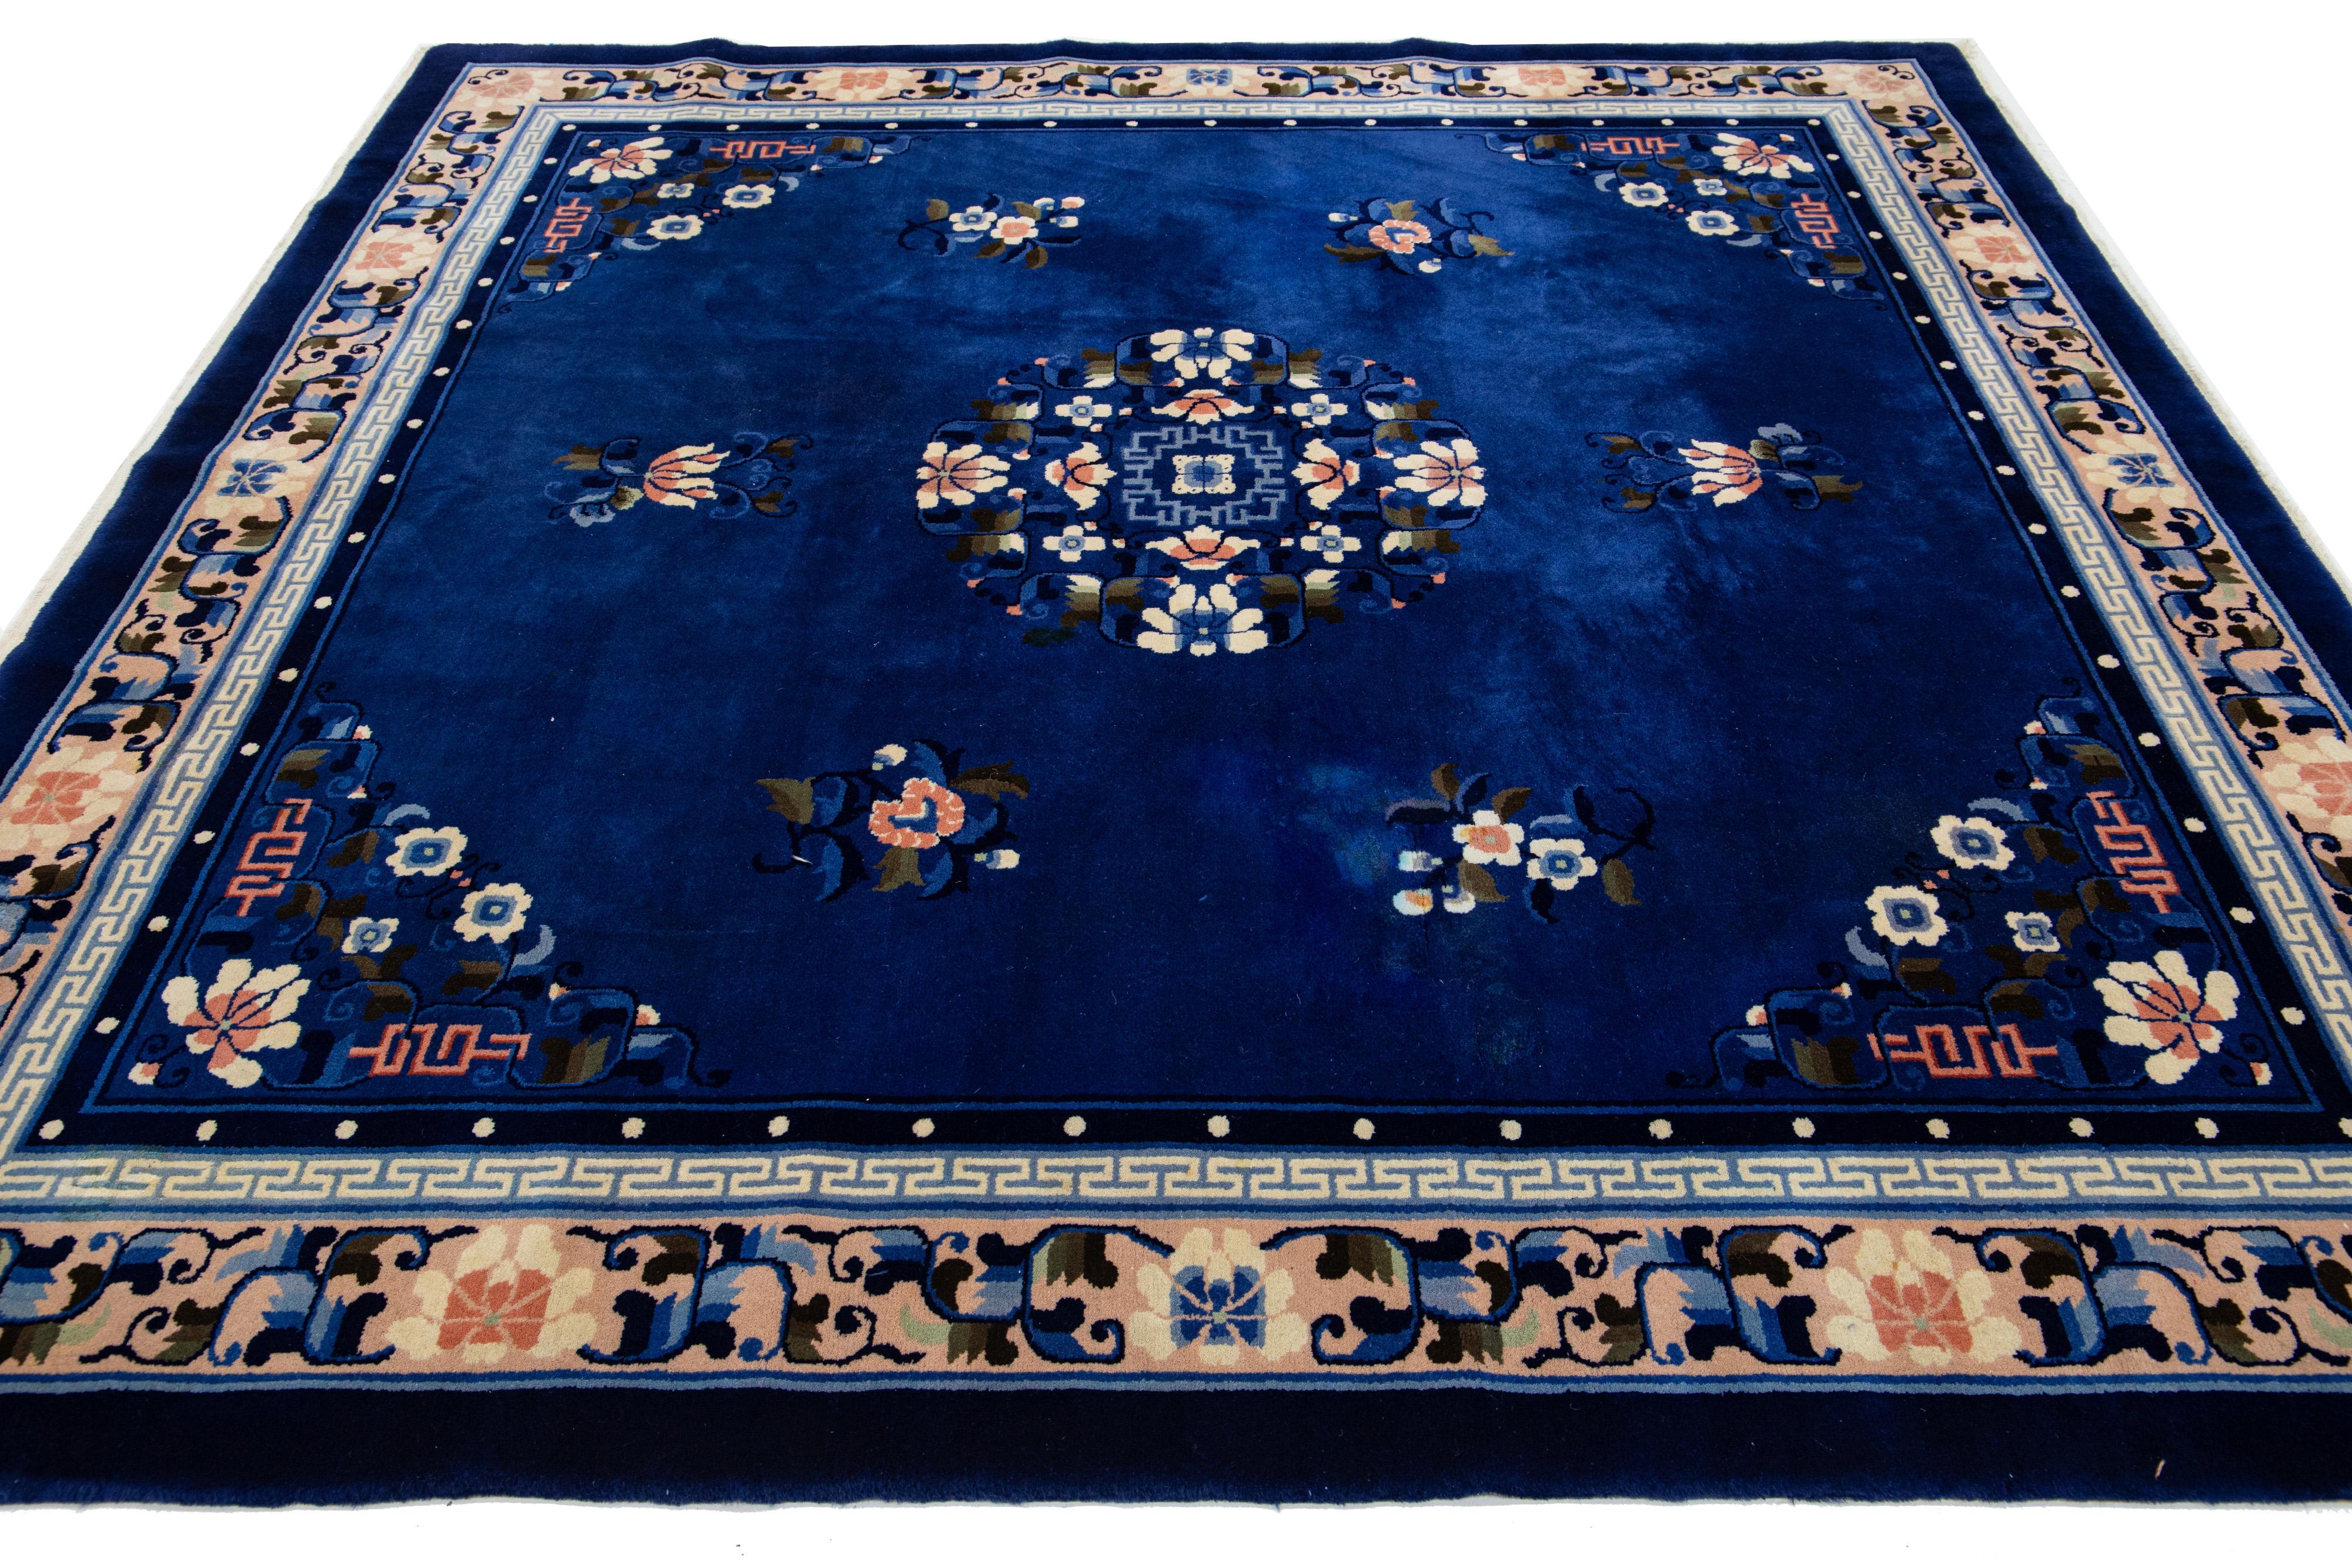 Handmade Square Blue Antique Wool Rug Designed Art Deco Fl In Excellent Condition For Sale In Norwalk, CT